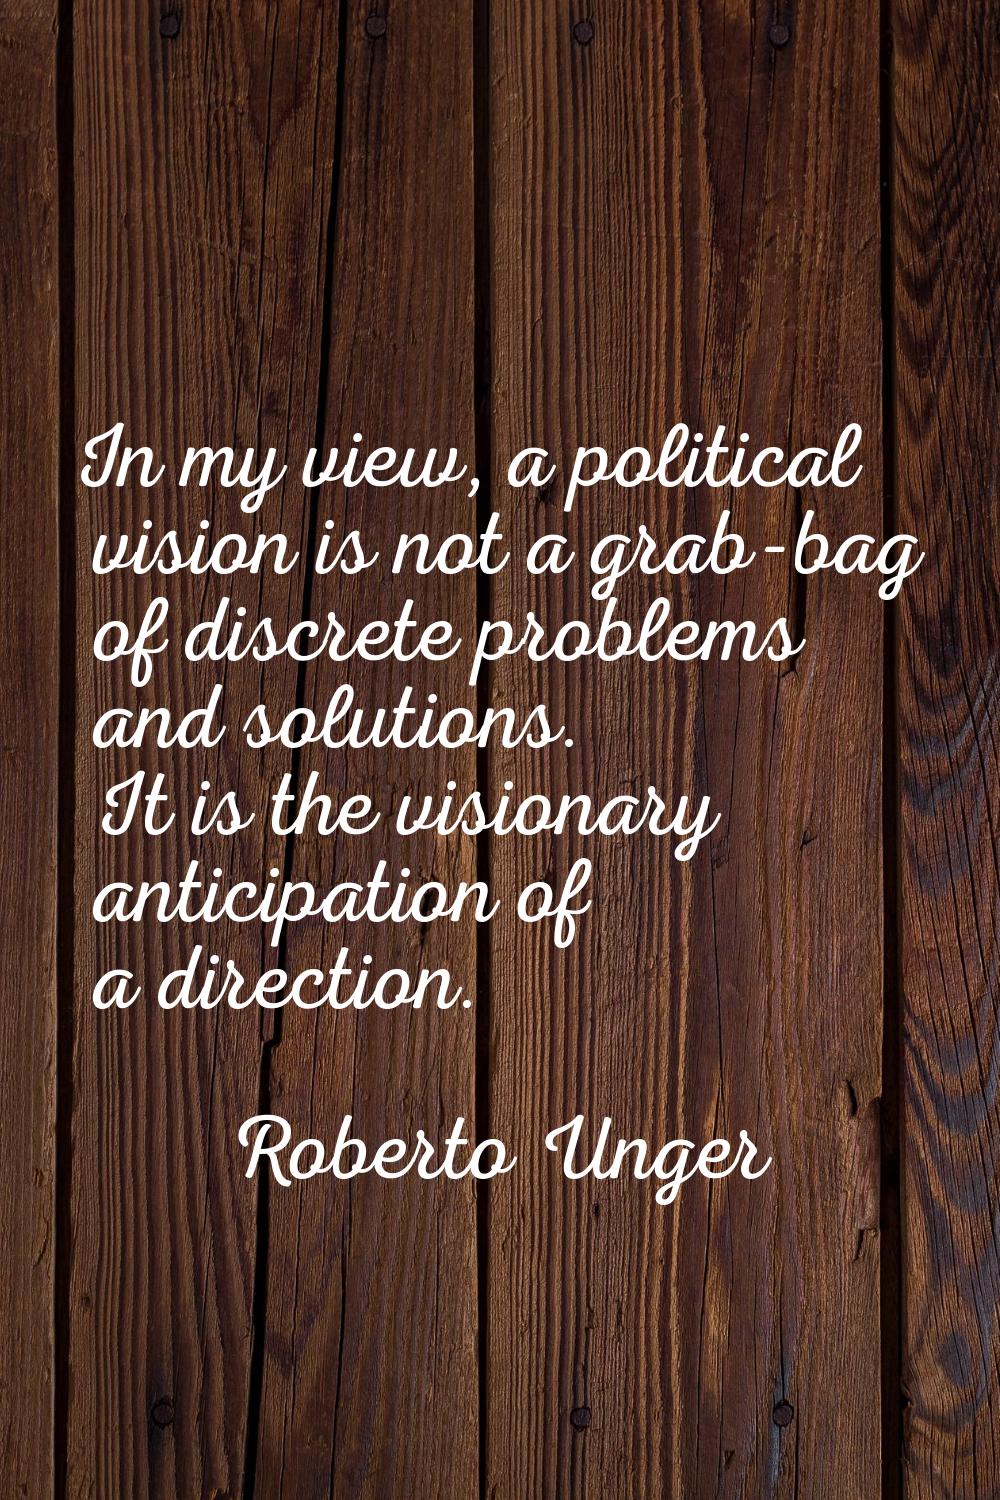 In my view, a political vision is not a grab-bag of discrete problems and solutions. It is the visi